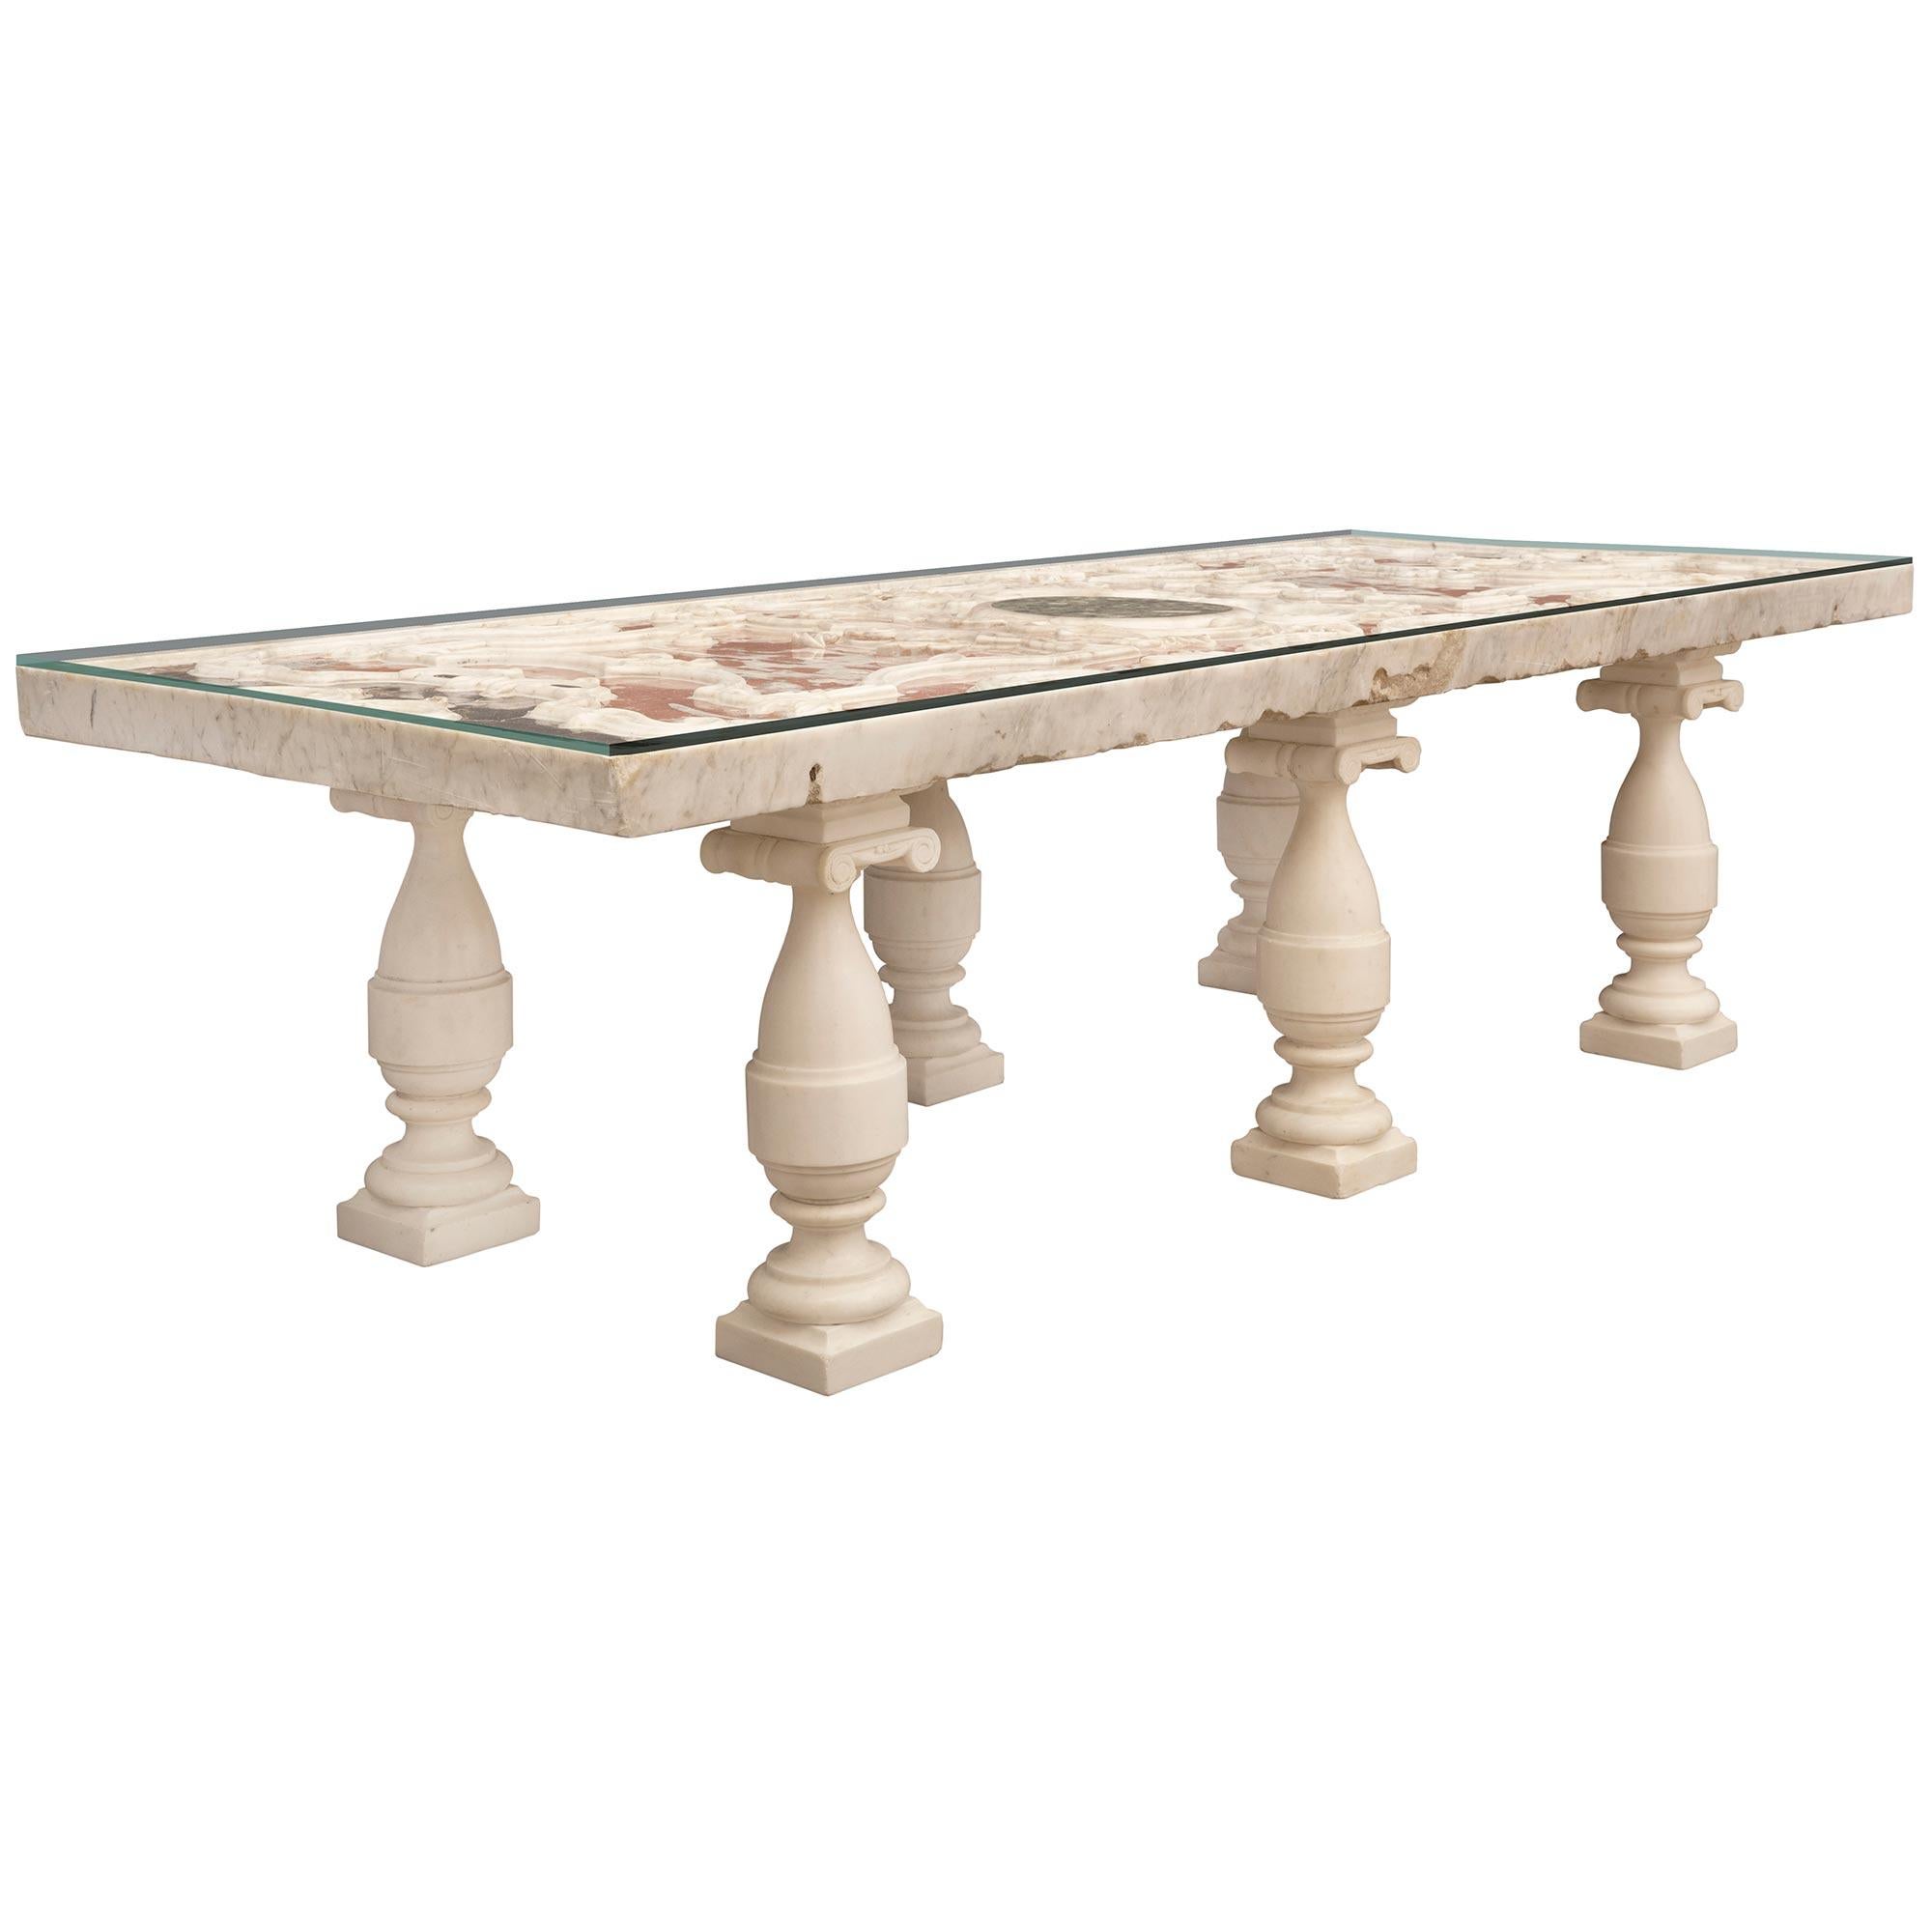 A sensational and rare Italian early 18th century Louis XIV period marble plateau coffee table. The rectangular plateau is raised by striking 19th century baluster shaped white Carrara marble supports with square bases, beautiful mottled designs,